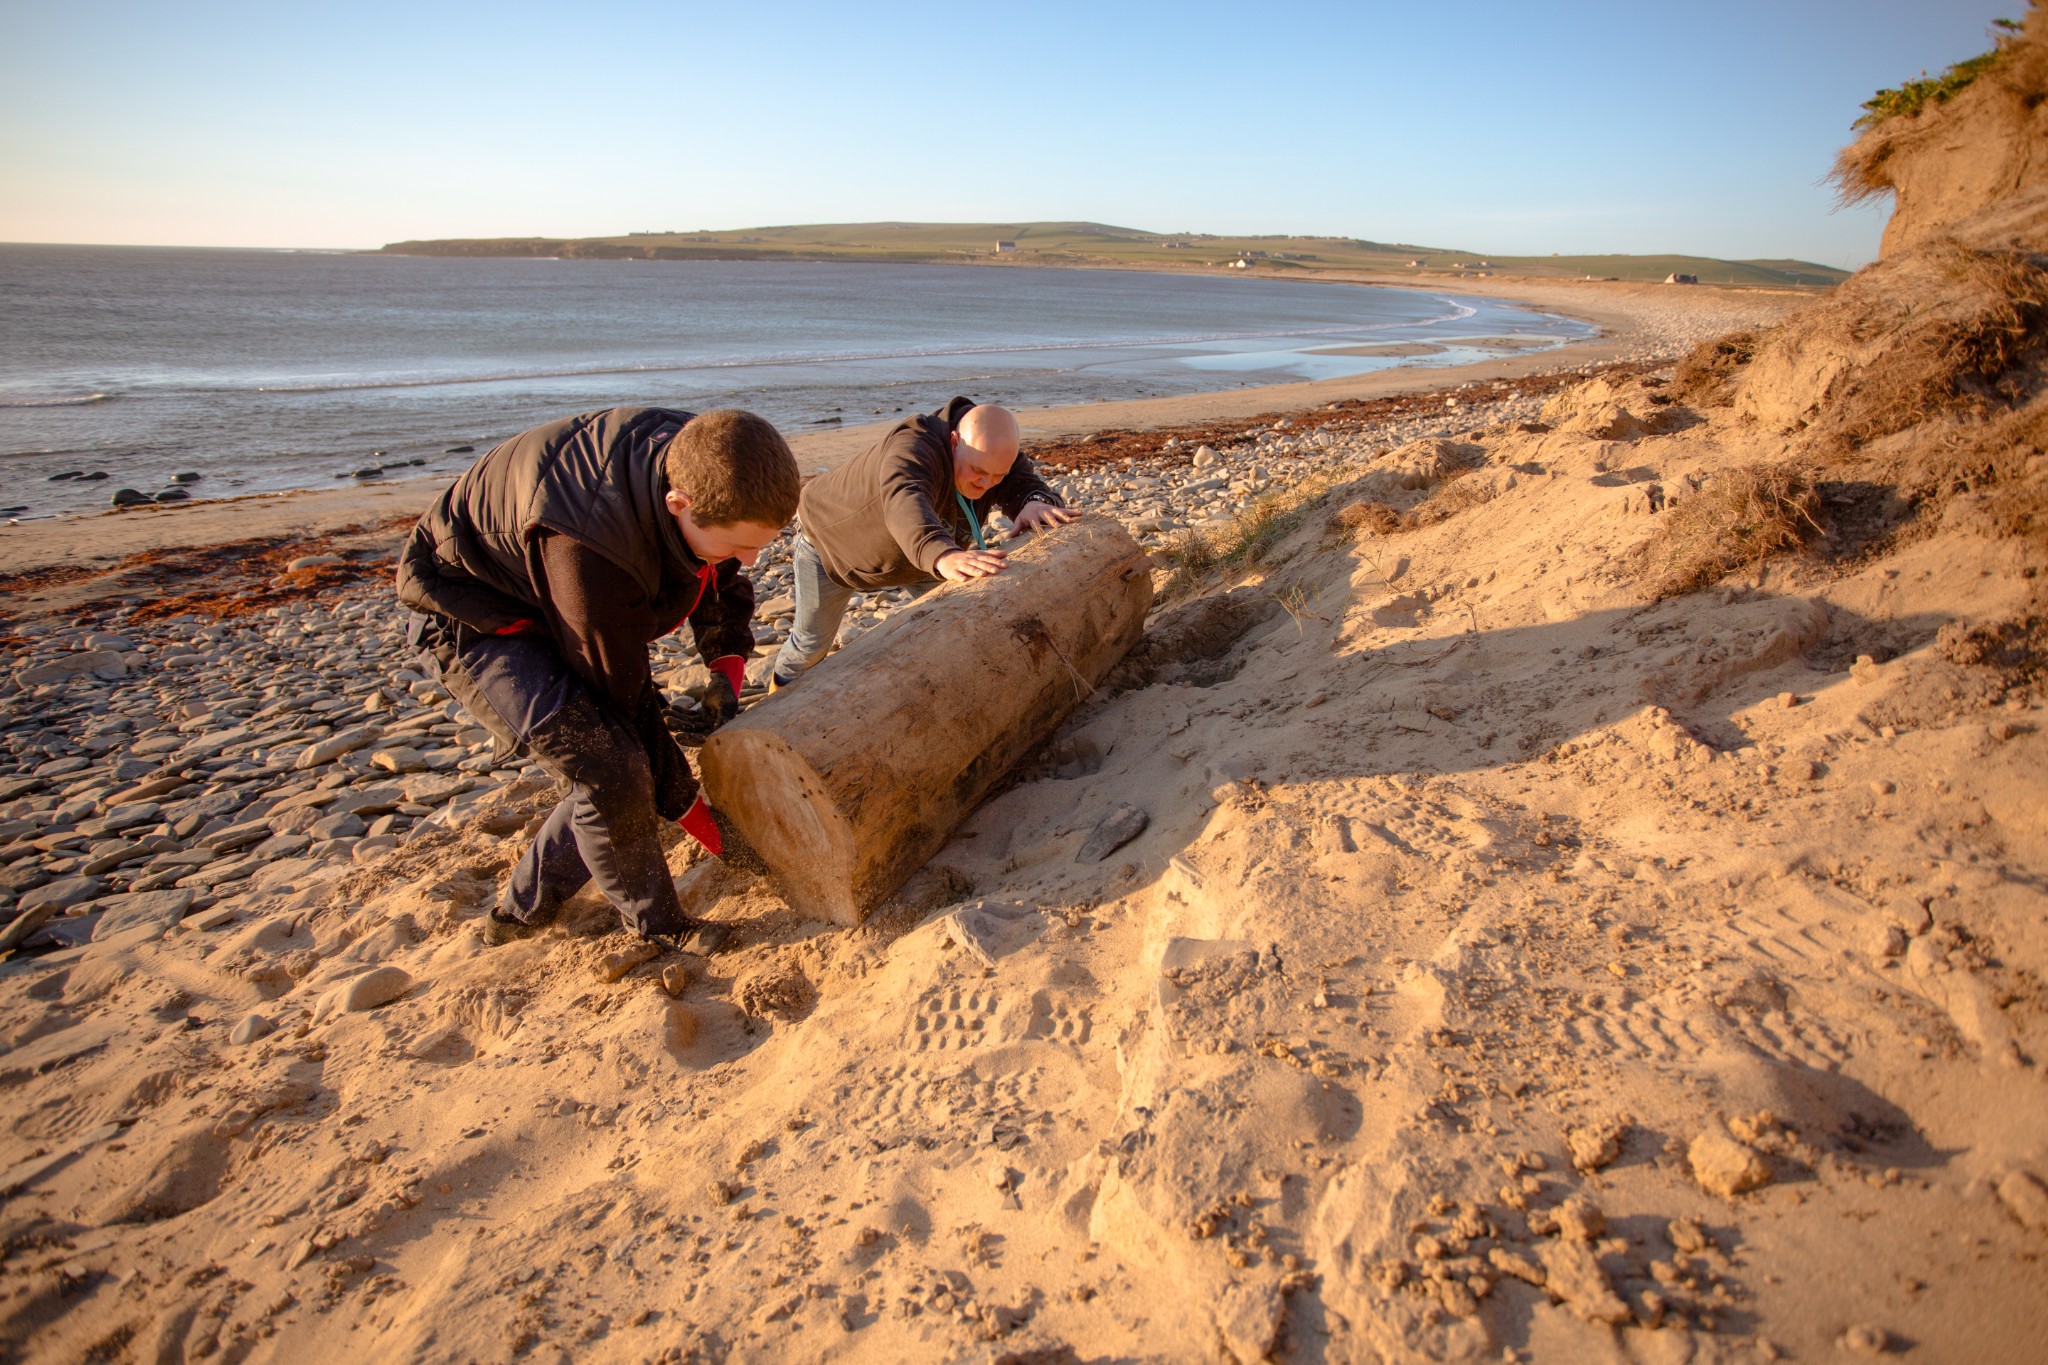 Fraser salvaging a piece of driftwood from the Bay of Skaill, Orkney